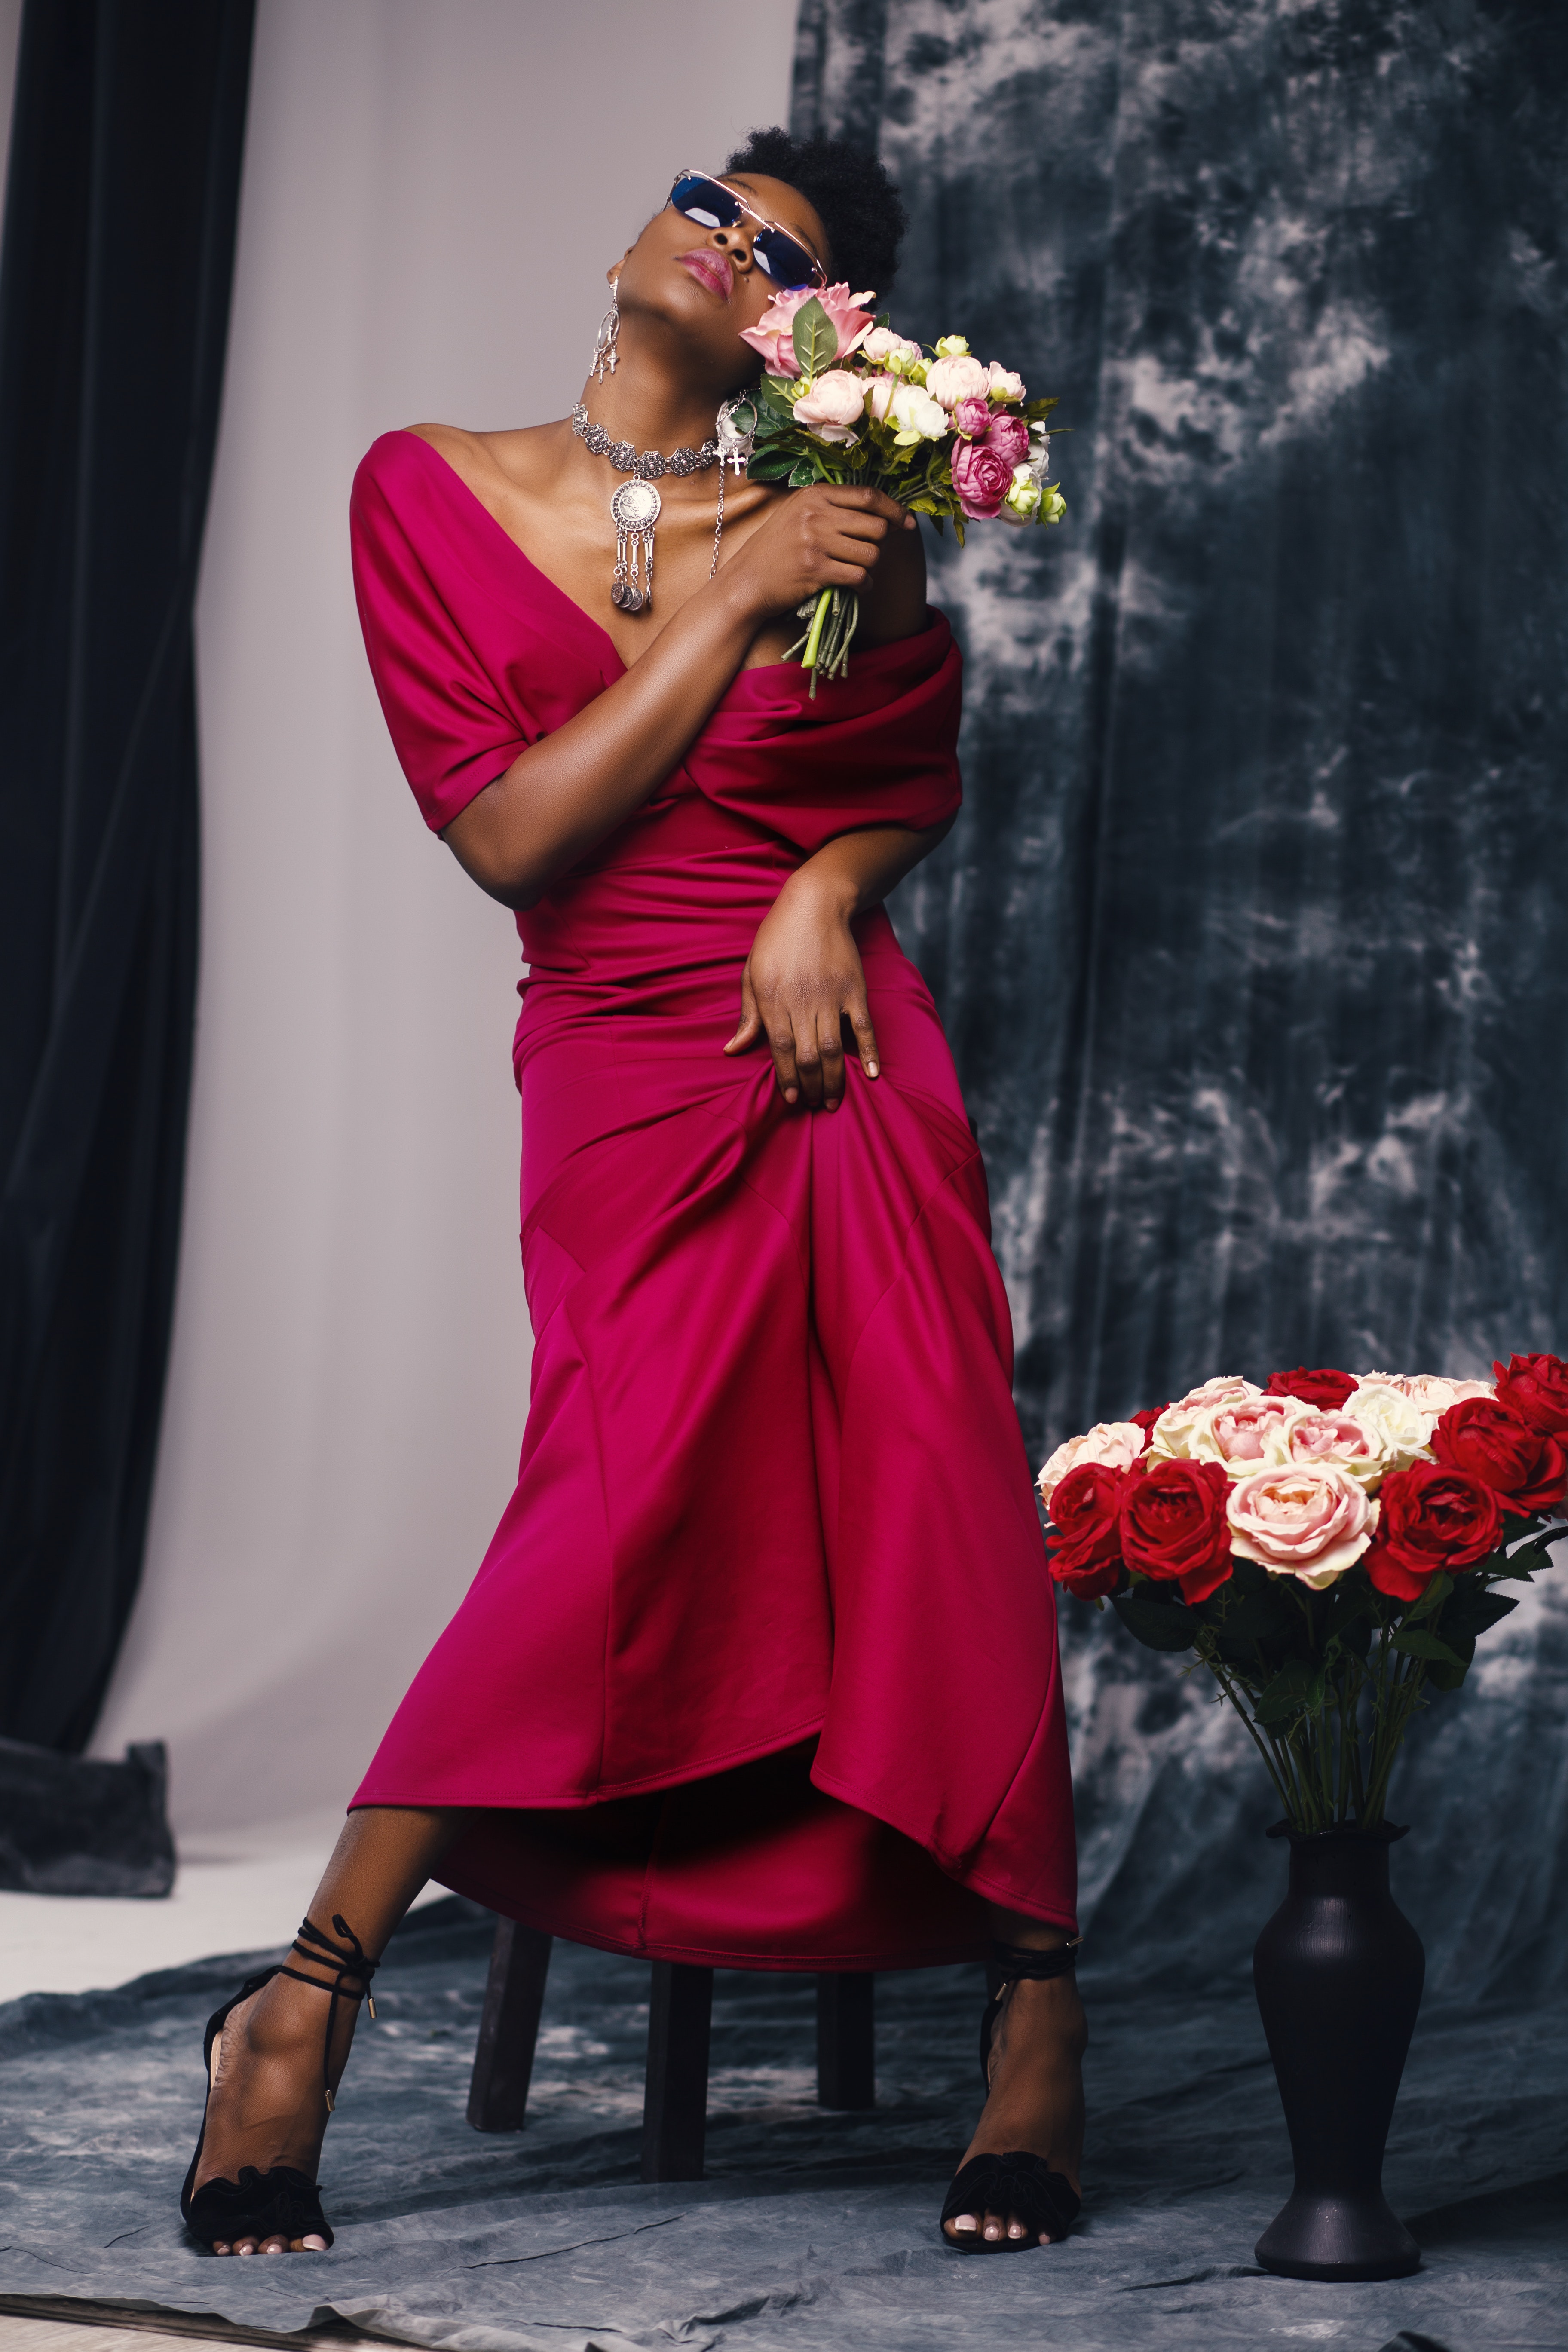 Woman in red dress holding flower photo